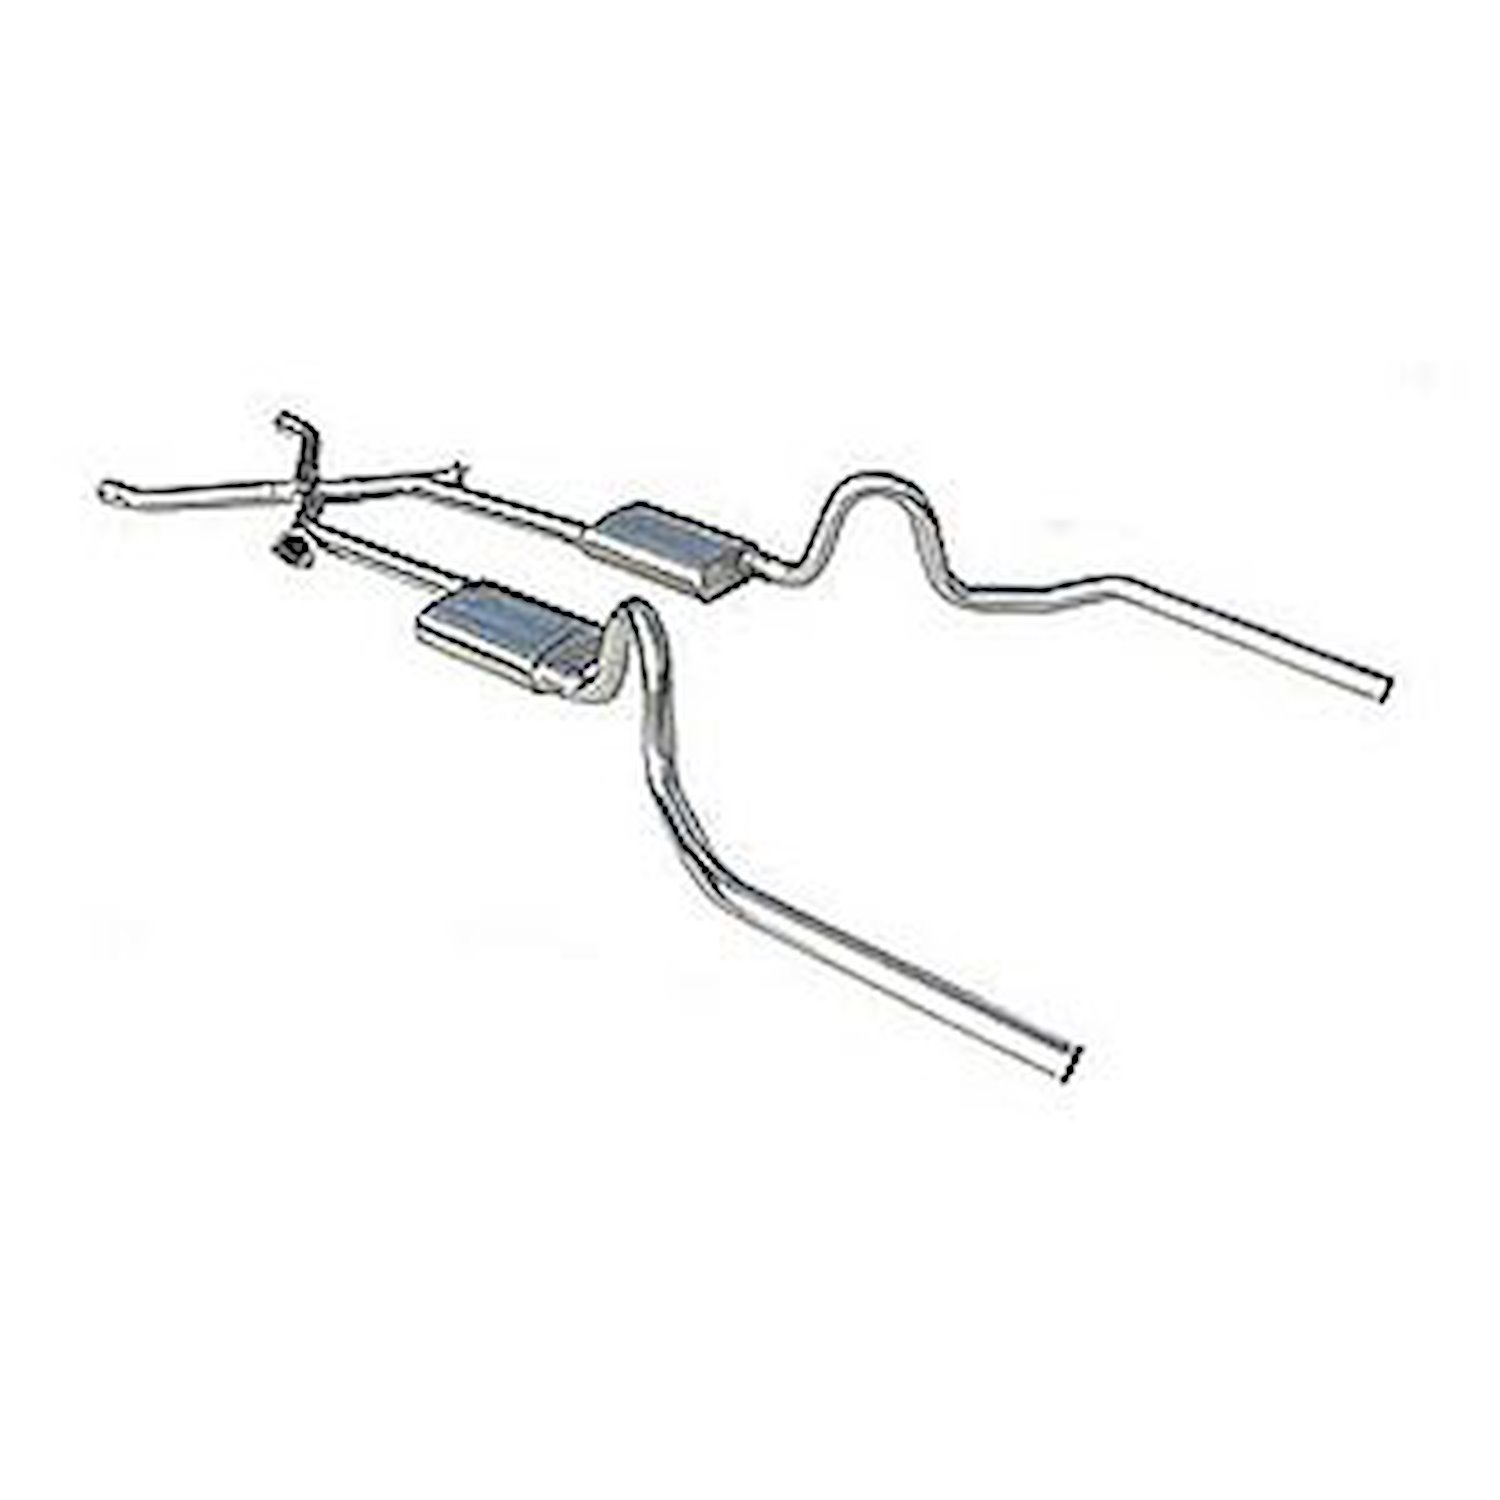 Race-Pro Crossmember-Back Exhaust System 1964-72 GM A Body